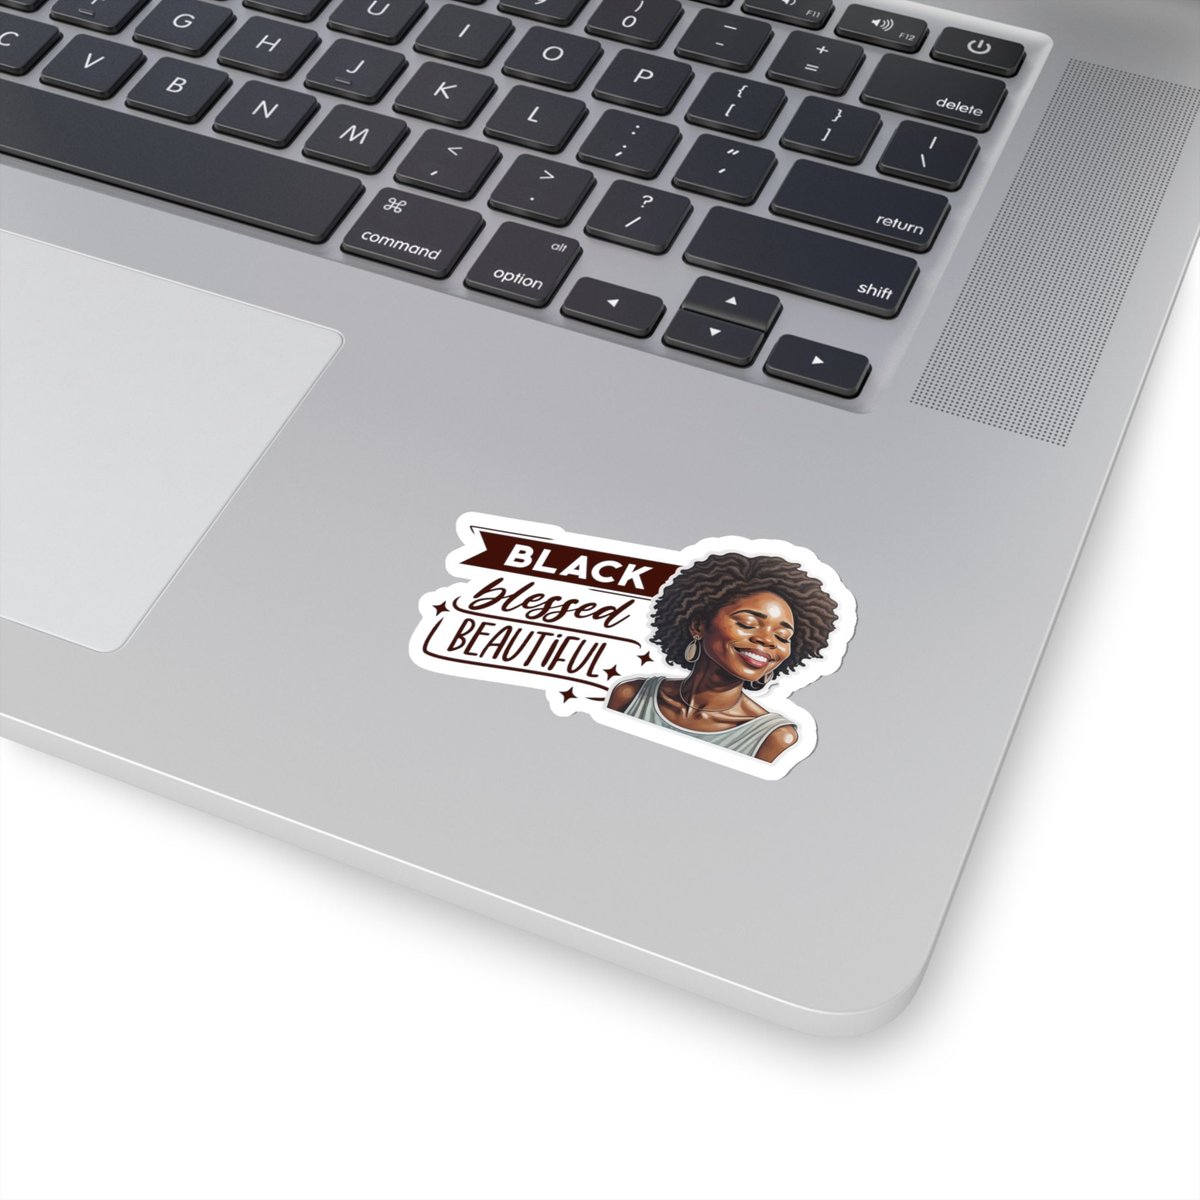 🐕 Big deals! Black , Blessed, Beautiful : African American Woman Empowerment Stickers only at $3.48 on etsy.com/listing/152441… Hurry. #blackgirlplanner #business